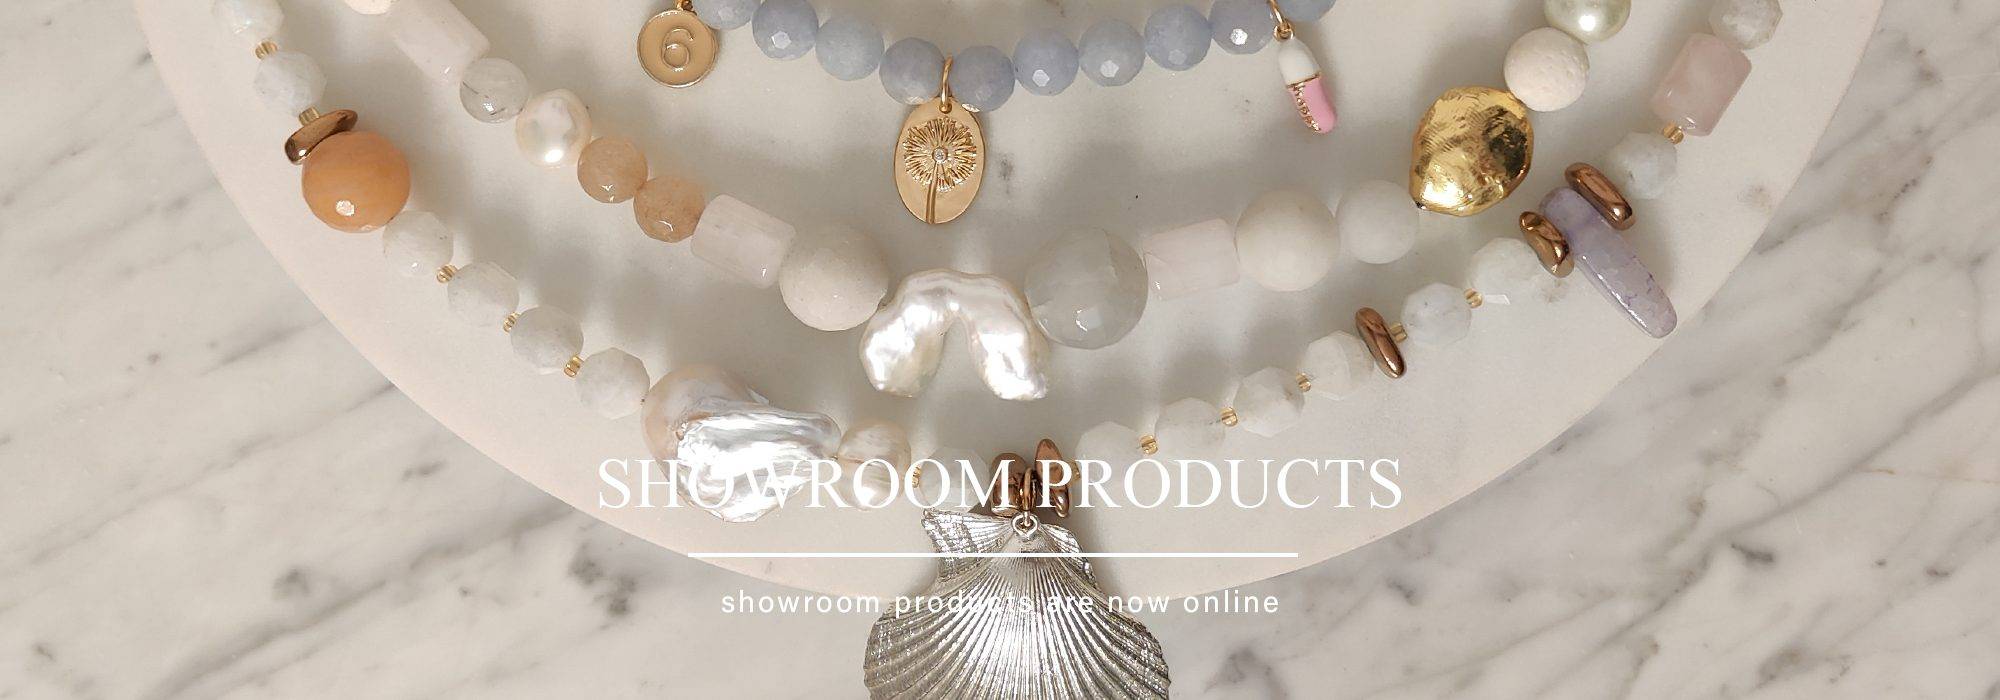 Showroom products